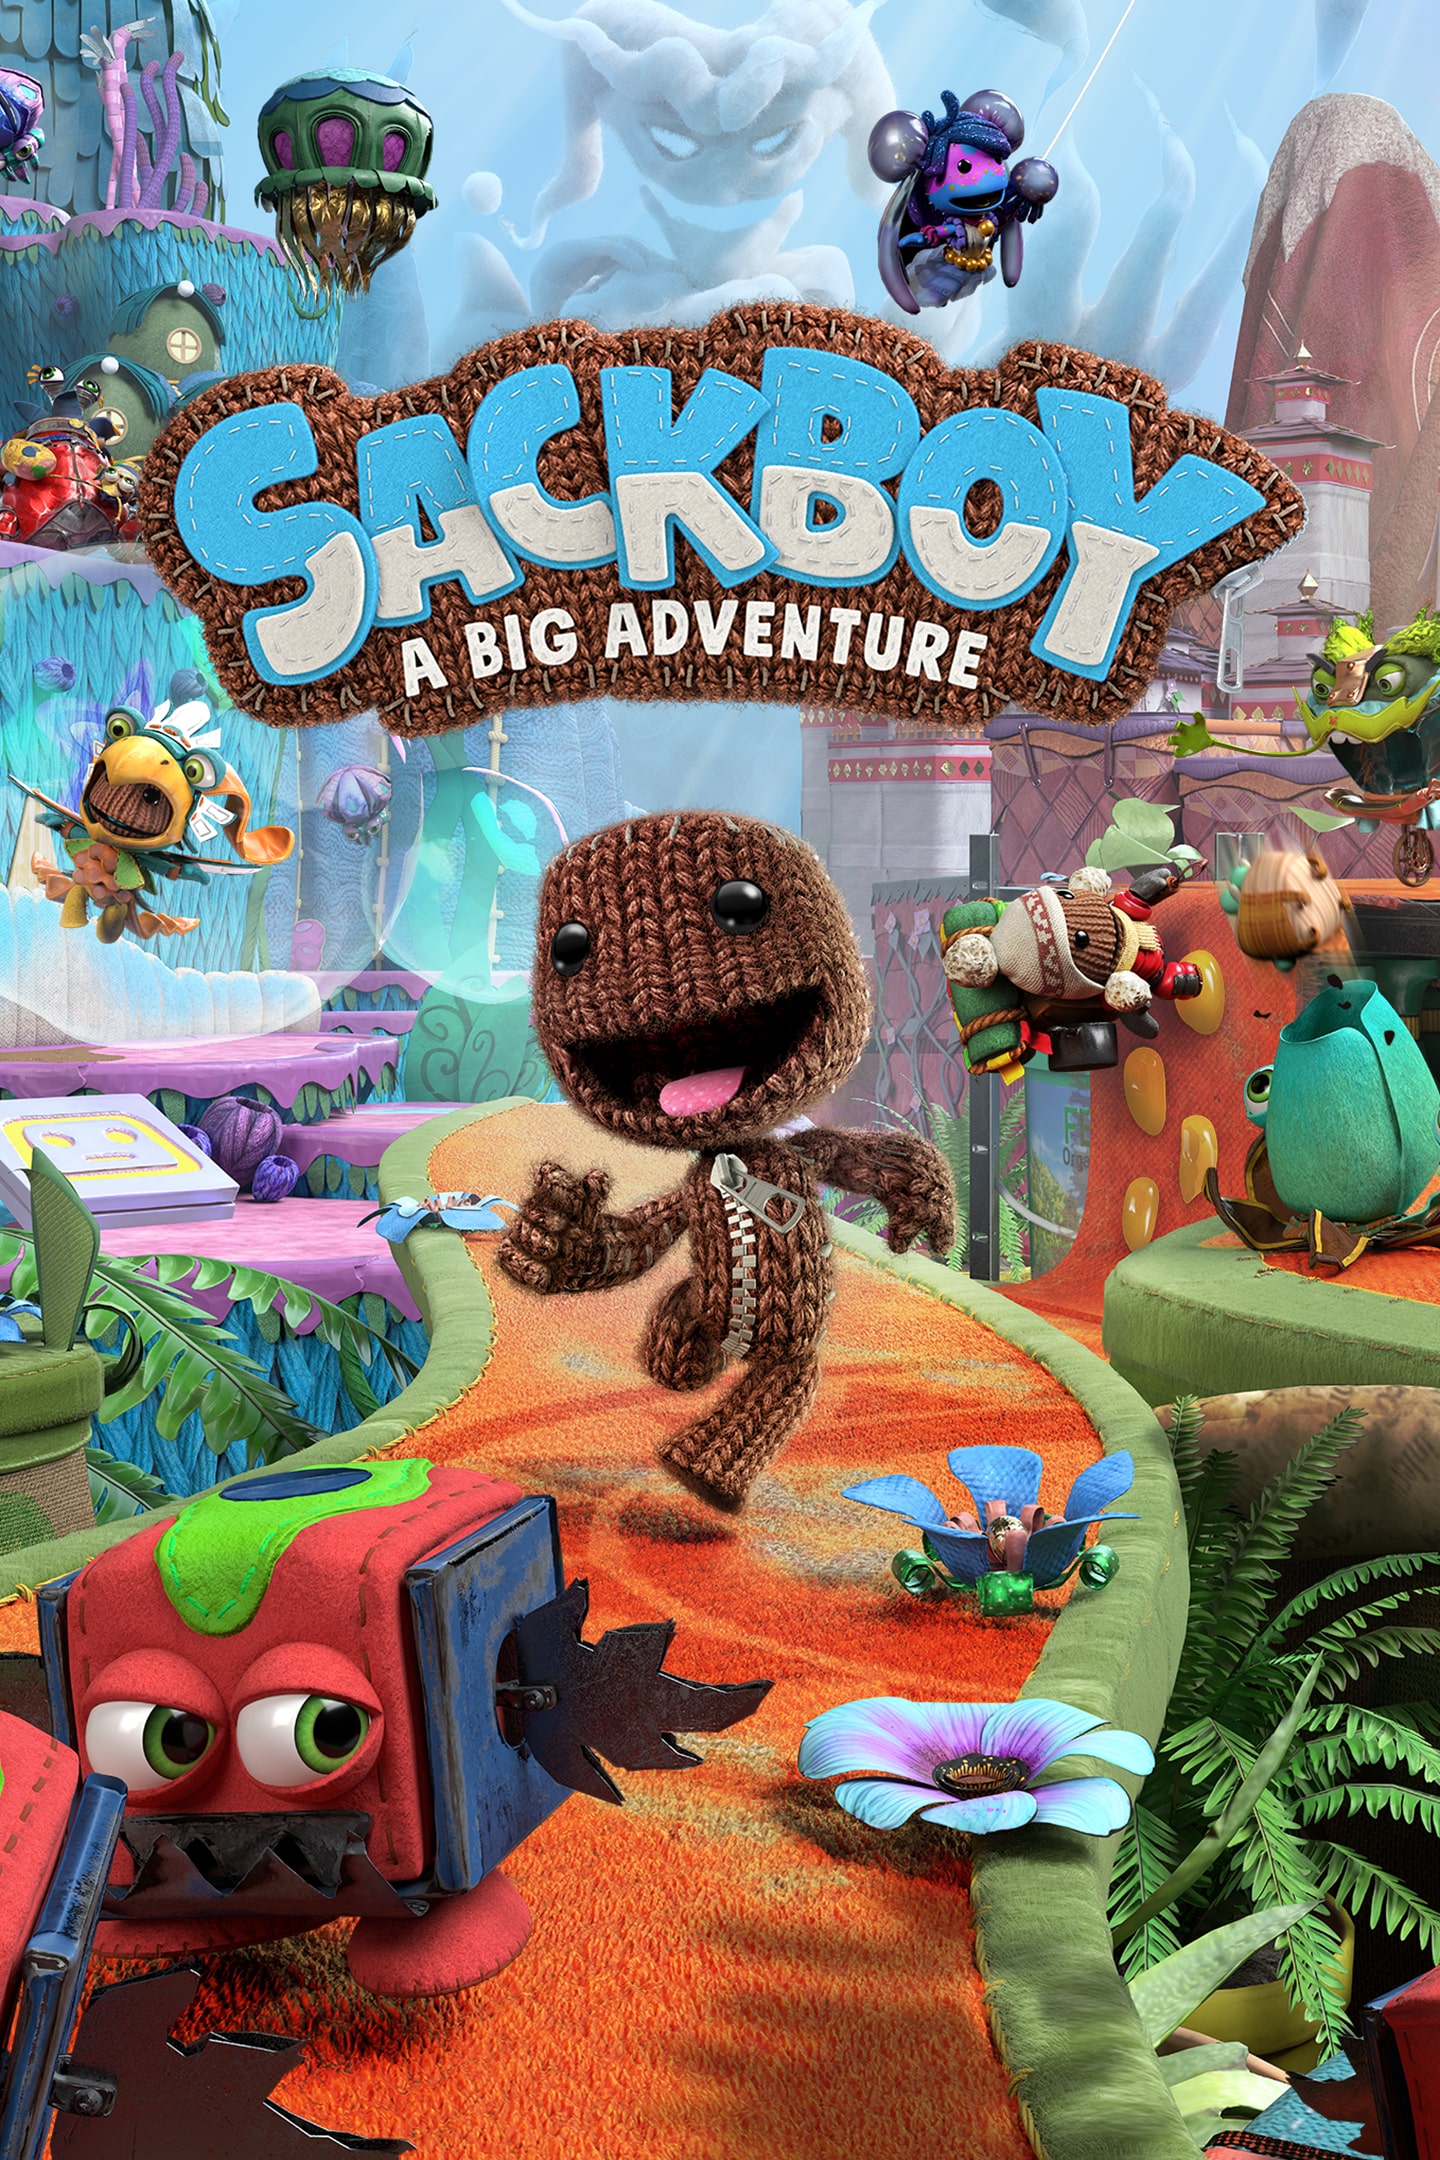 Sackboy A Big Adventure - PS5 and PS4 Games